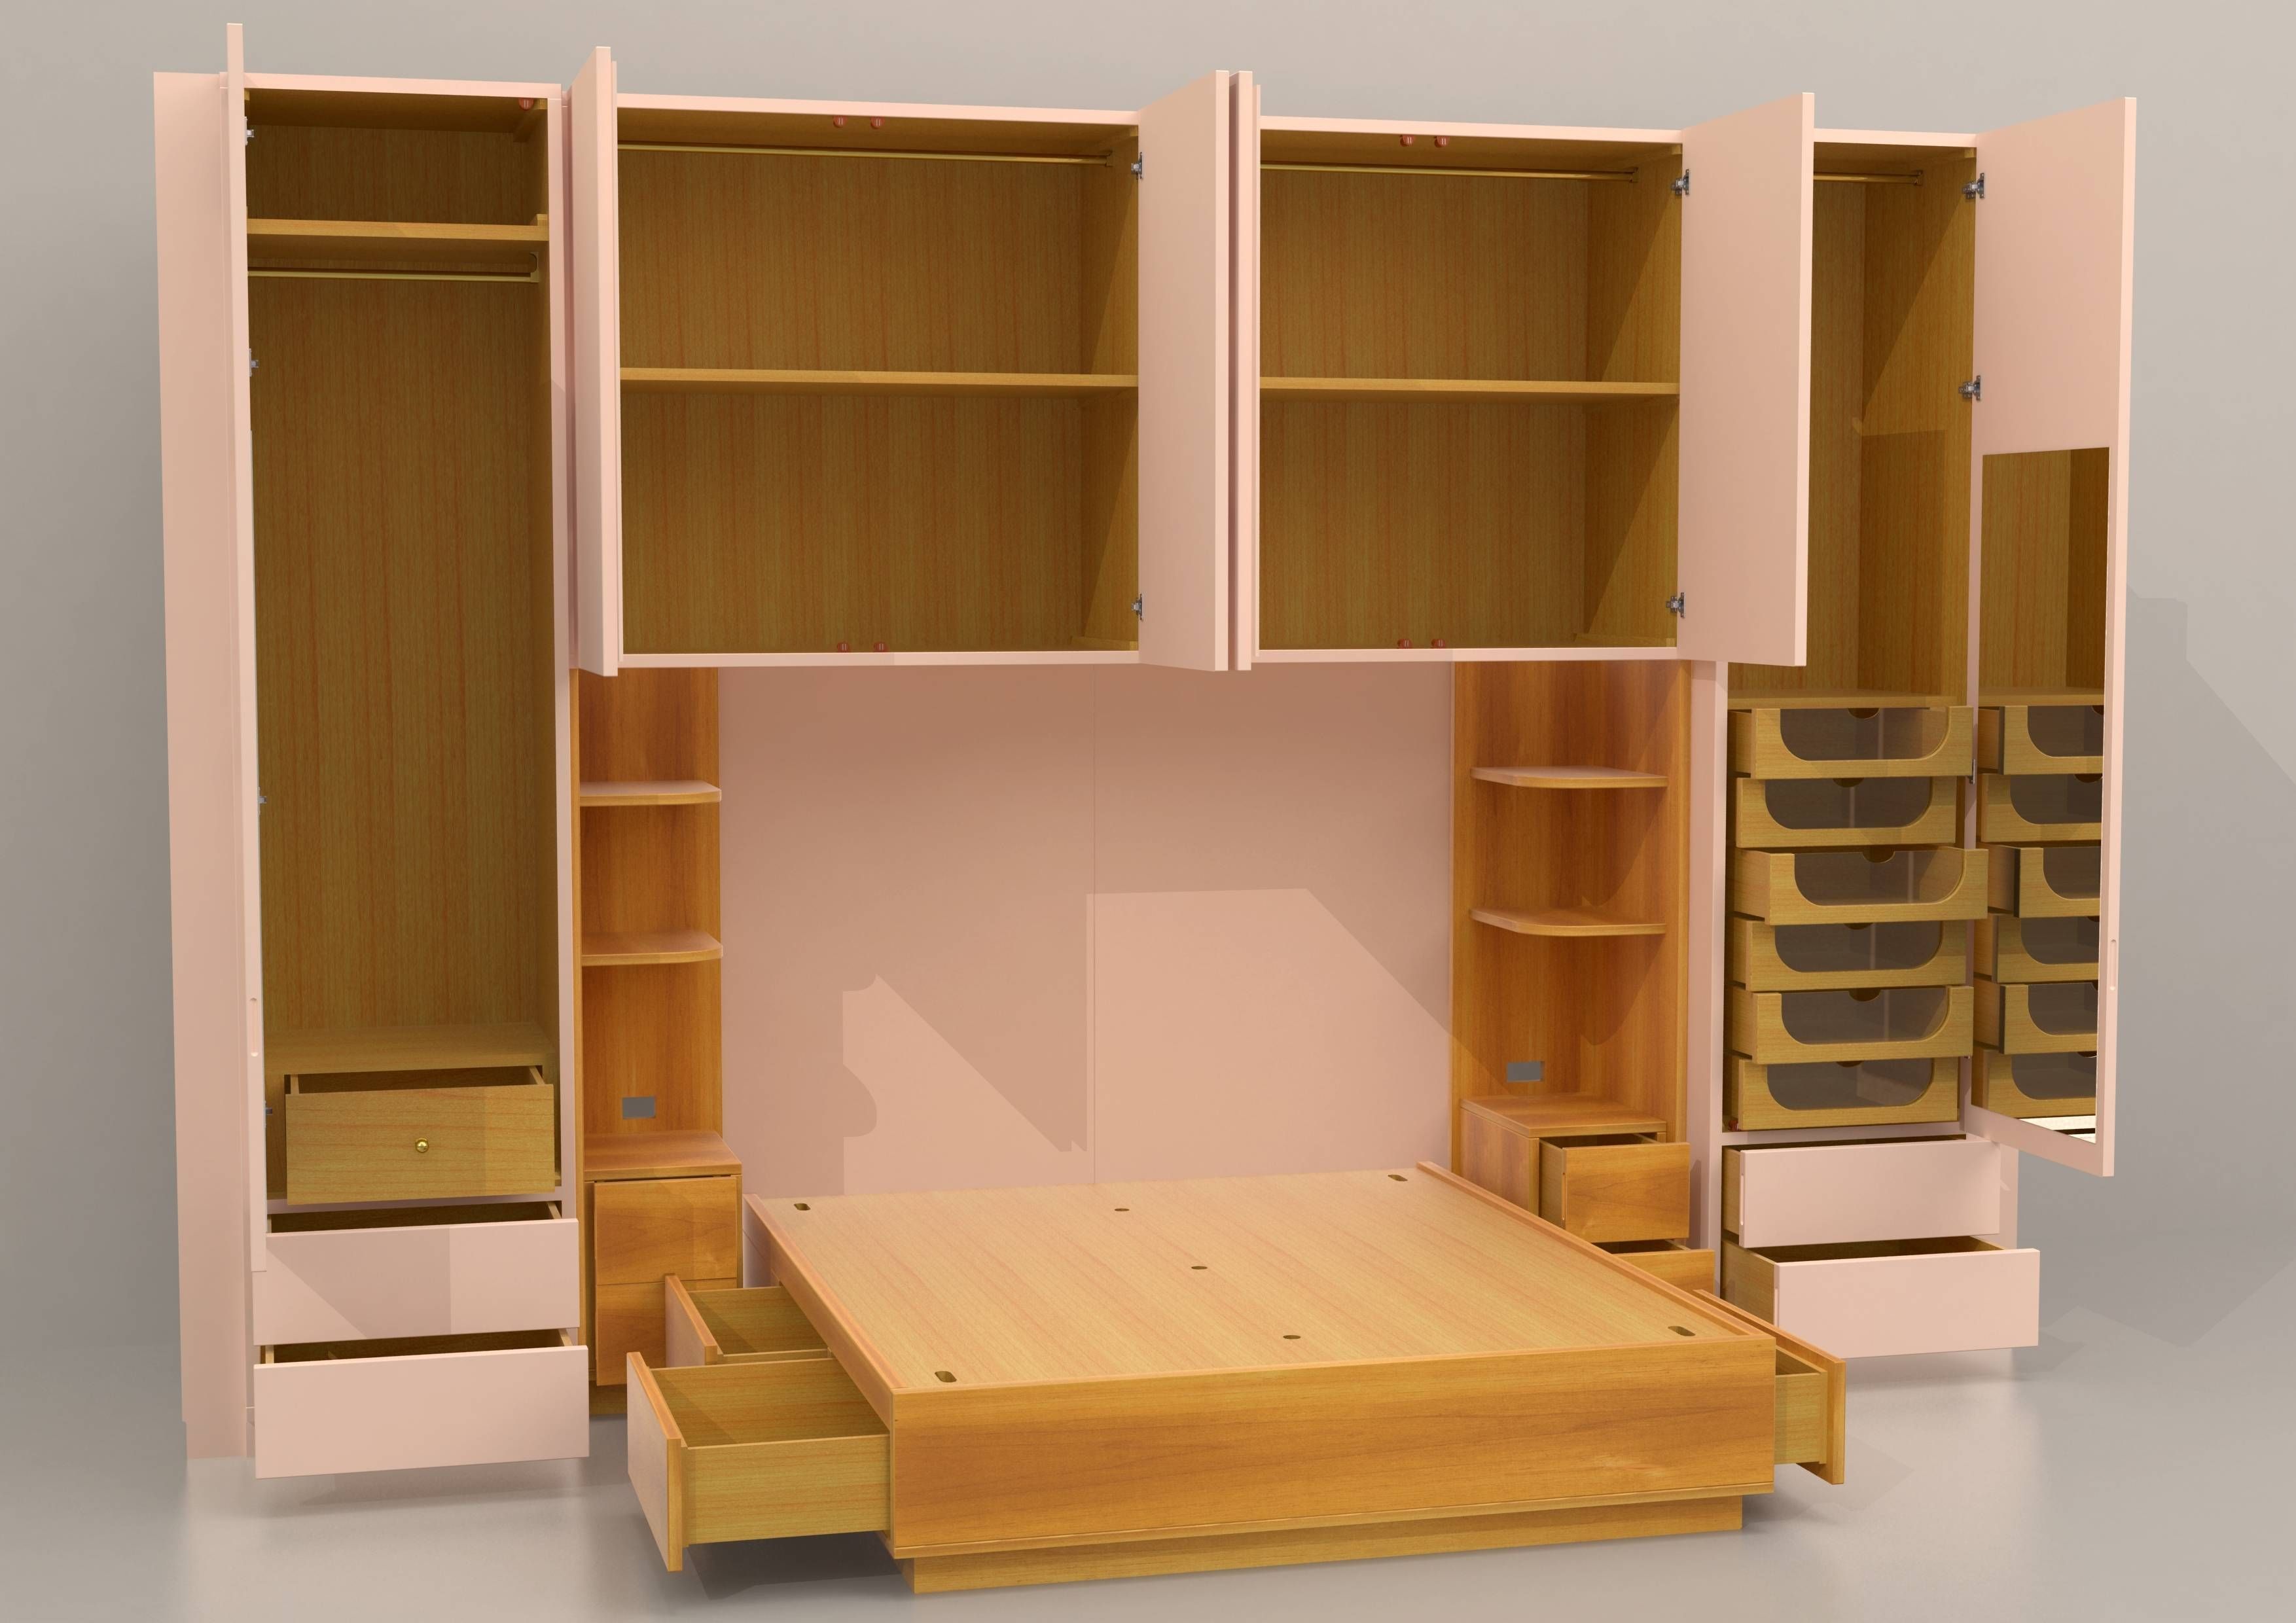 Bedroom Furniture : Wardrobe Bed Bed Cabinet Bedroom Storage Shelf Throughout Wardrobes Above Bed (View 15 of 15)